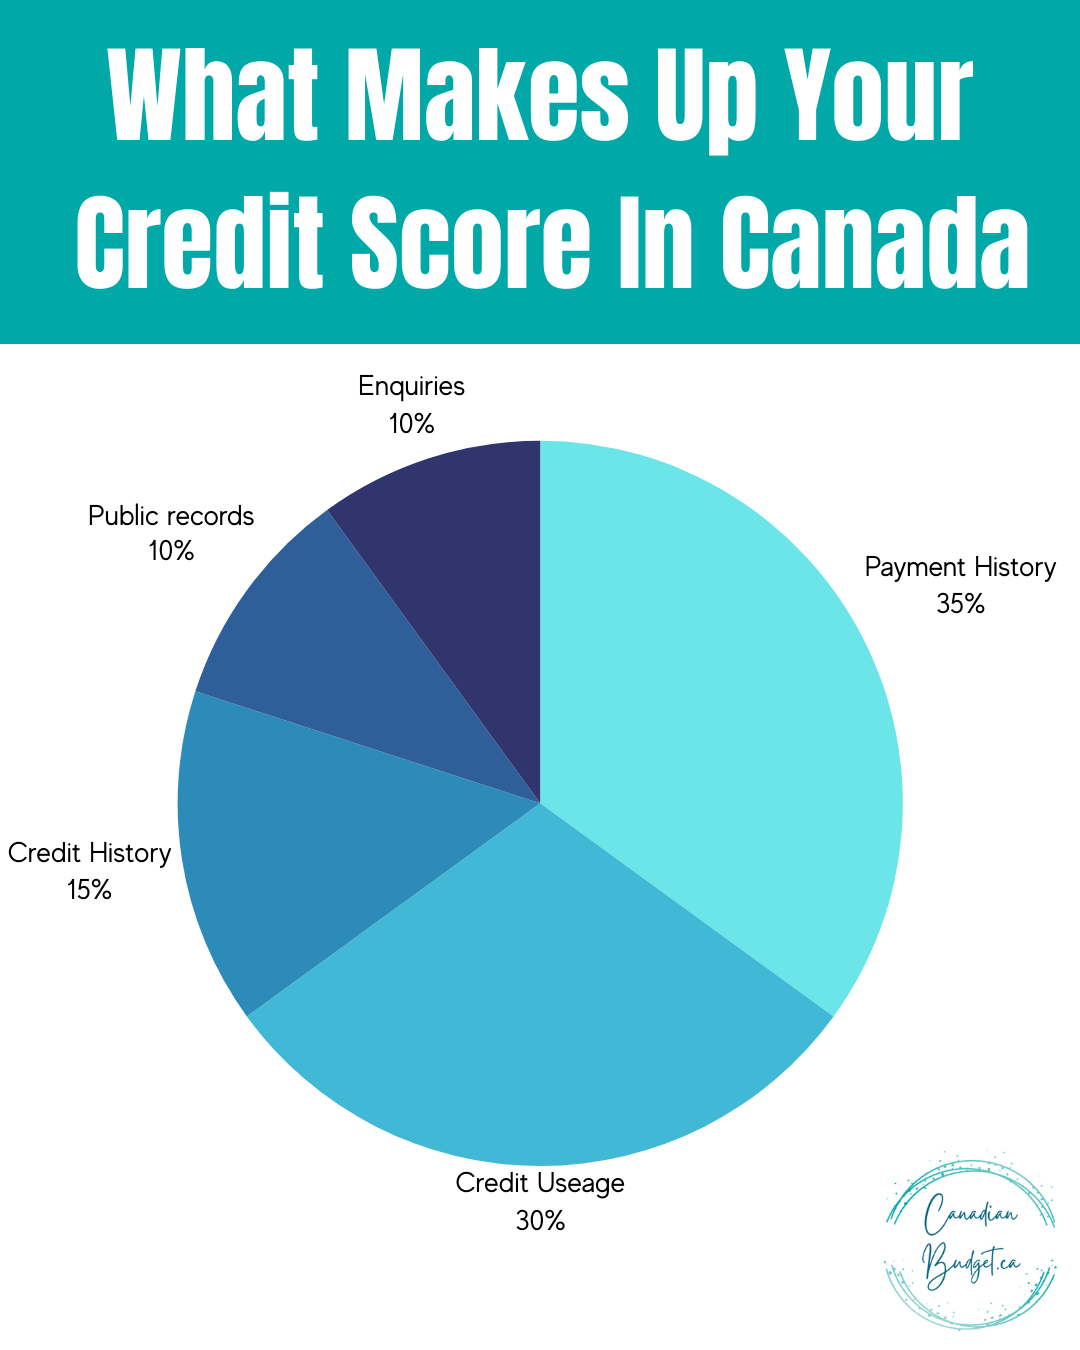 What makes up your credit score in Canada